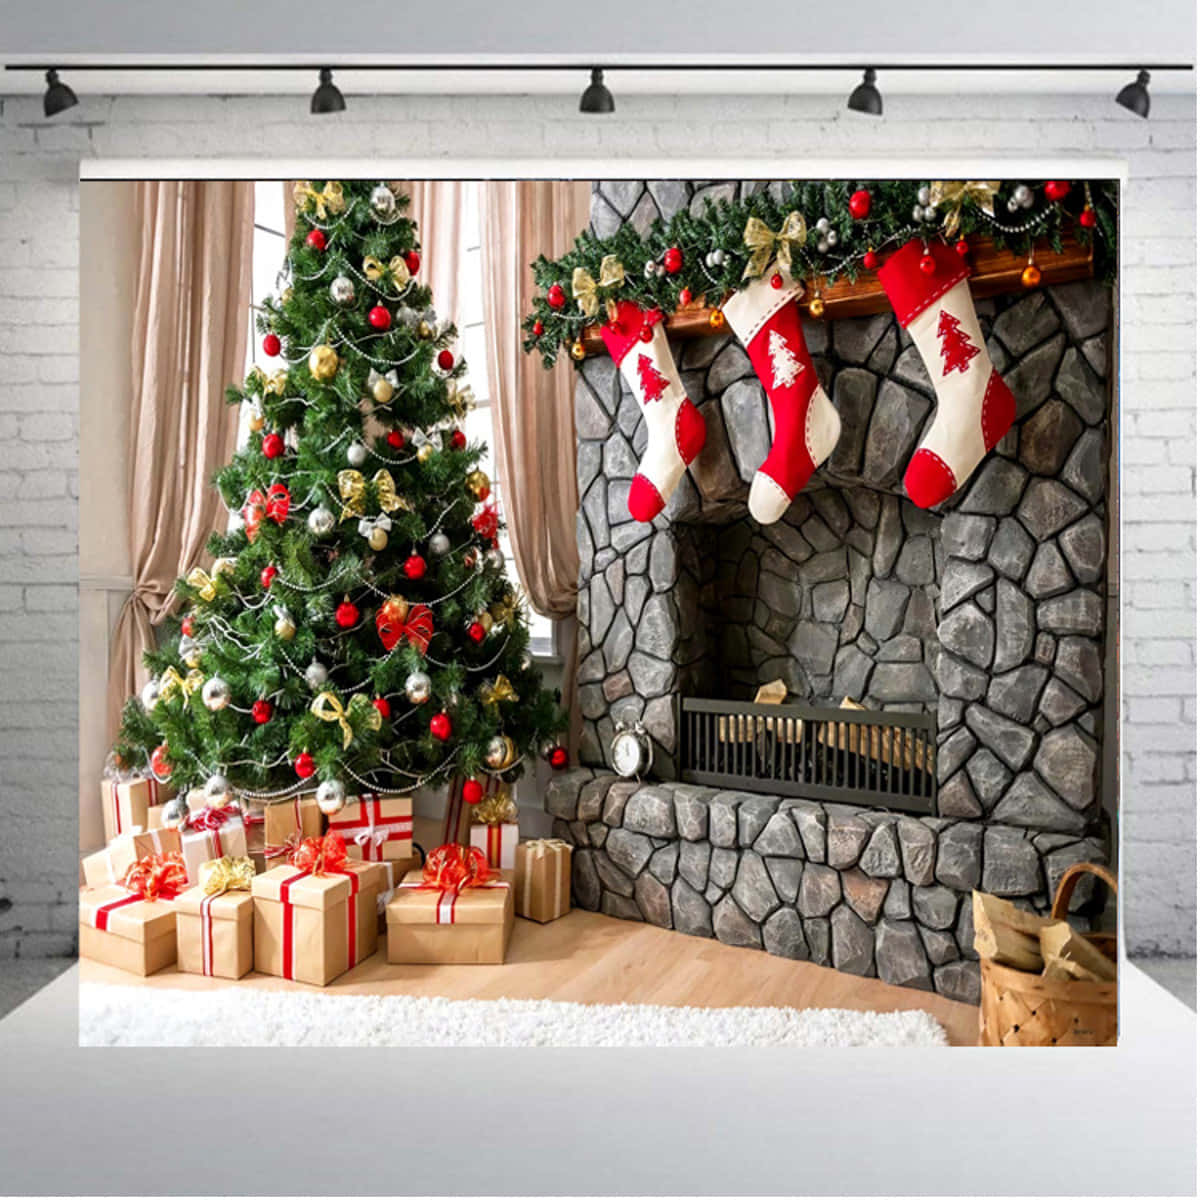 Christmas Tree With Stockings And Presents In Front Of A Fireplace